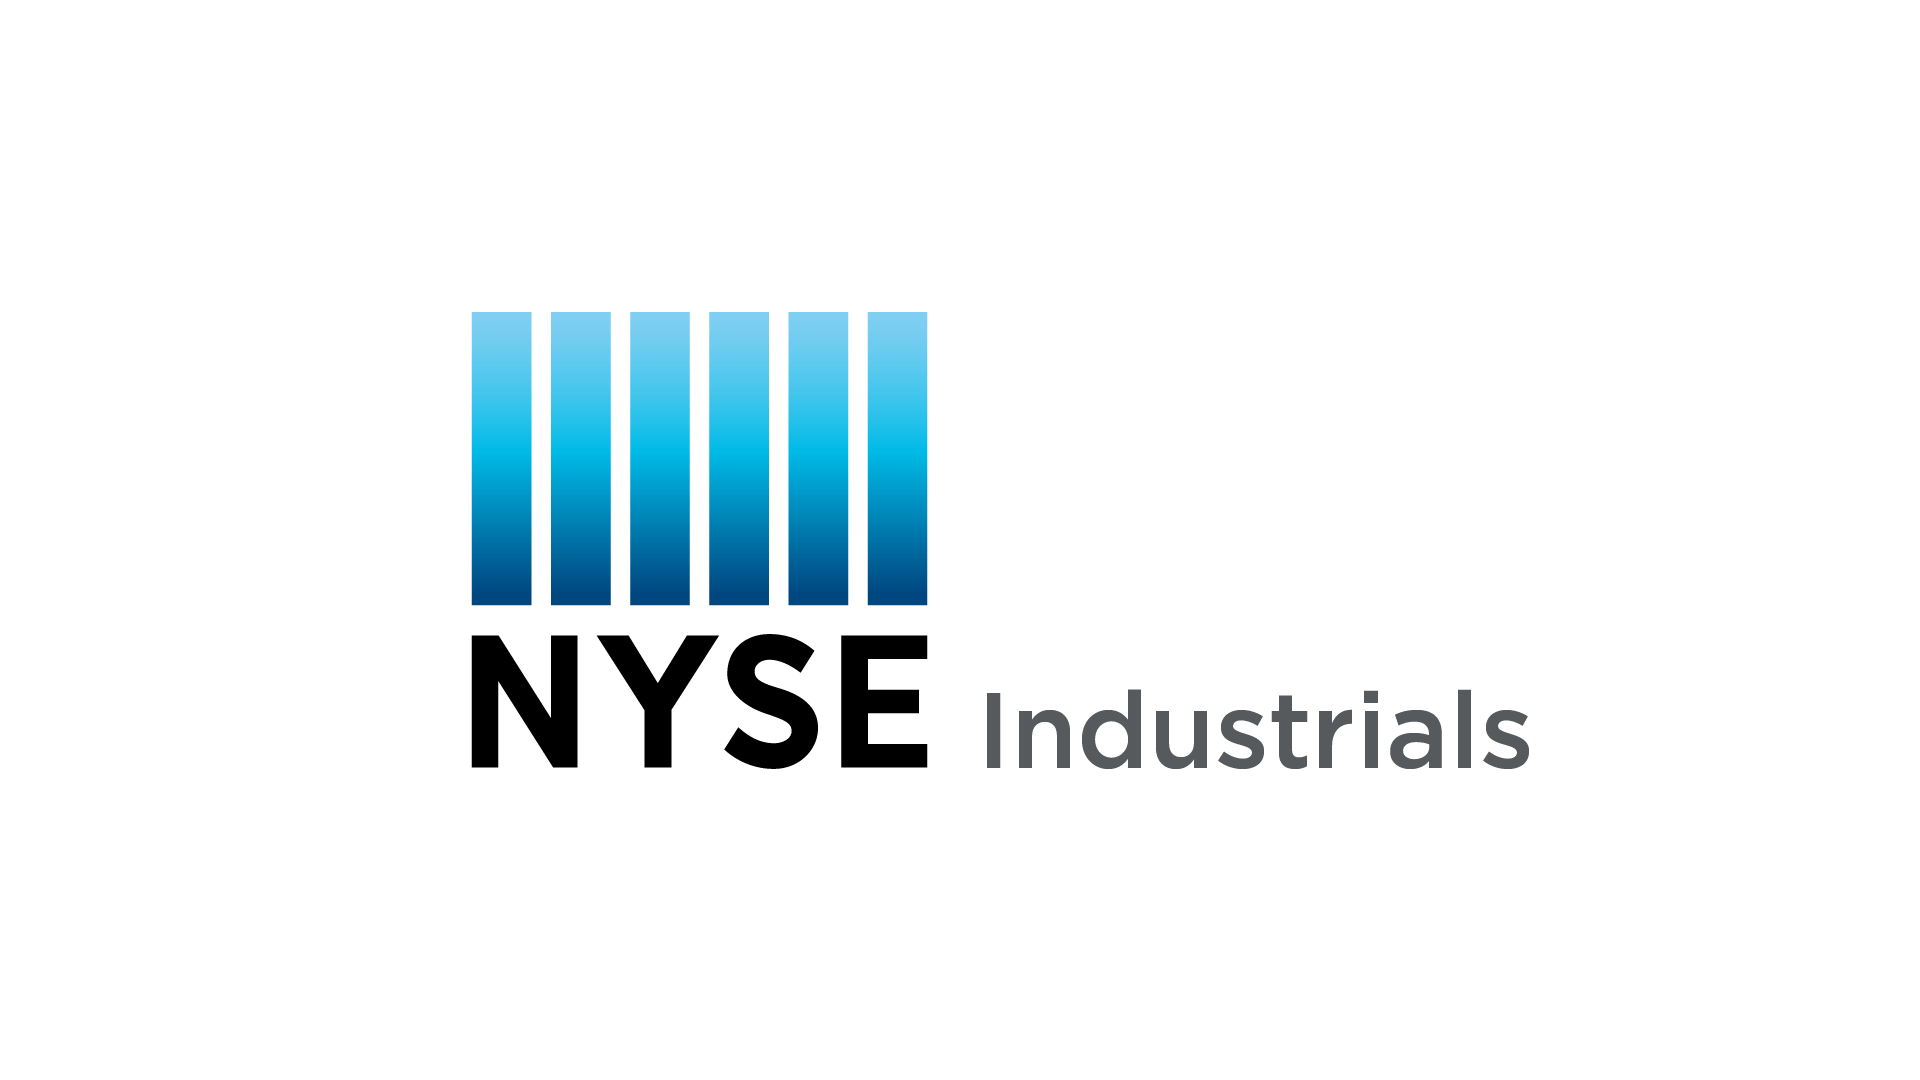 NYSE Logo - August 7, 2019